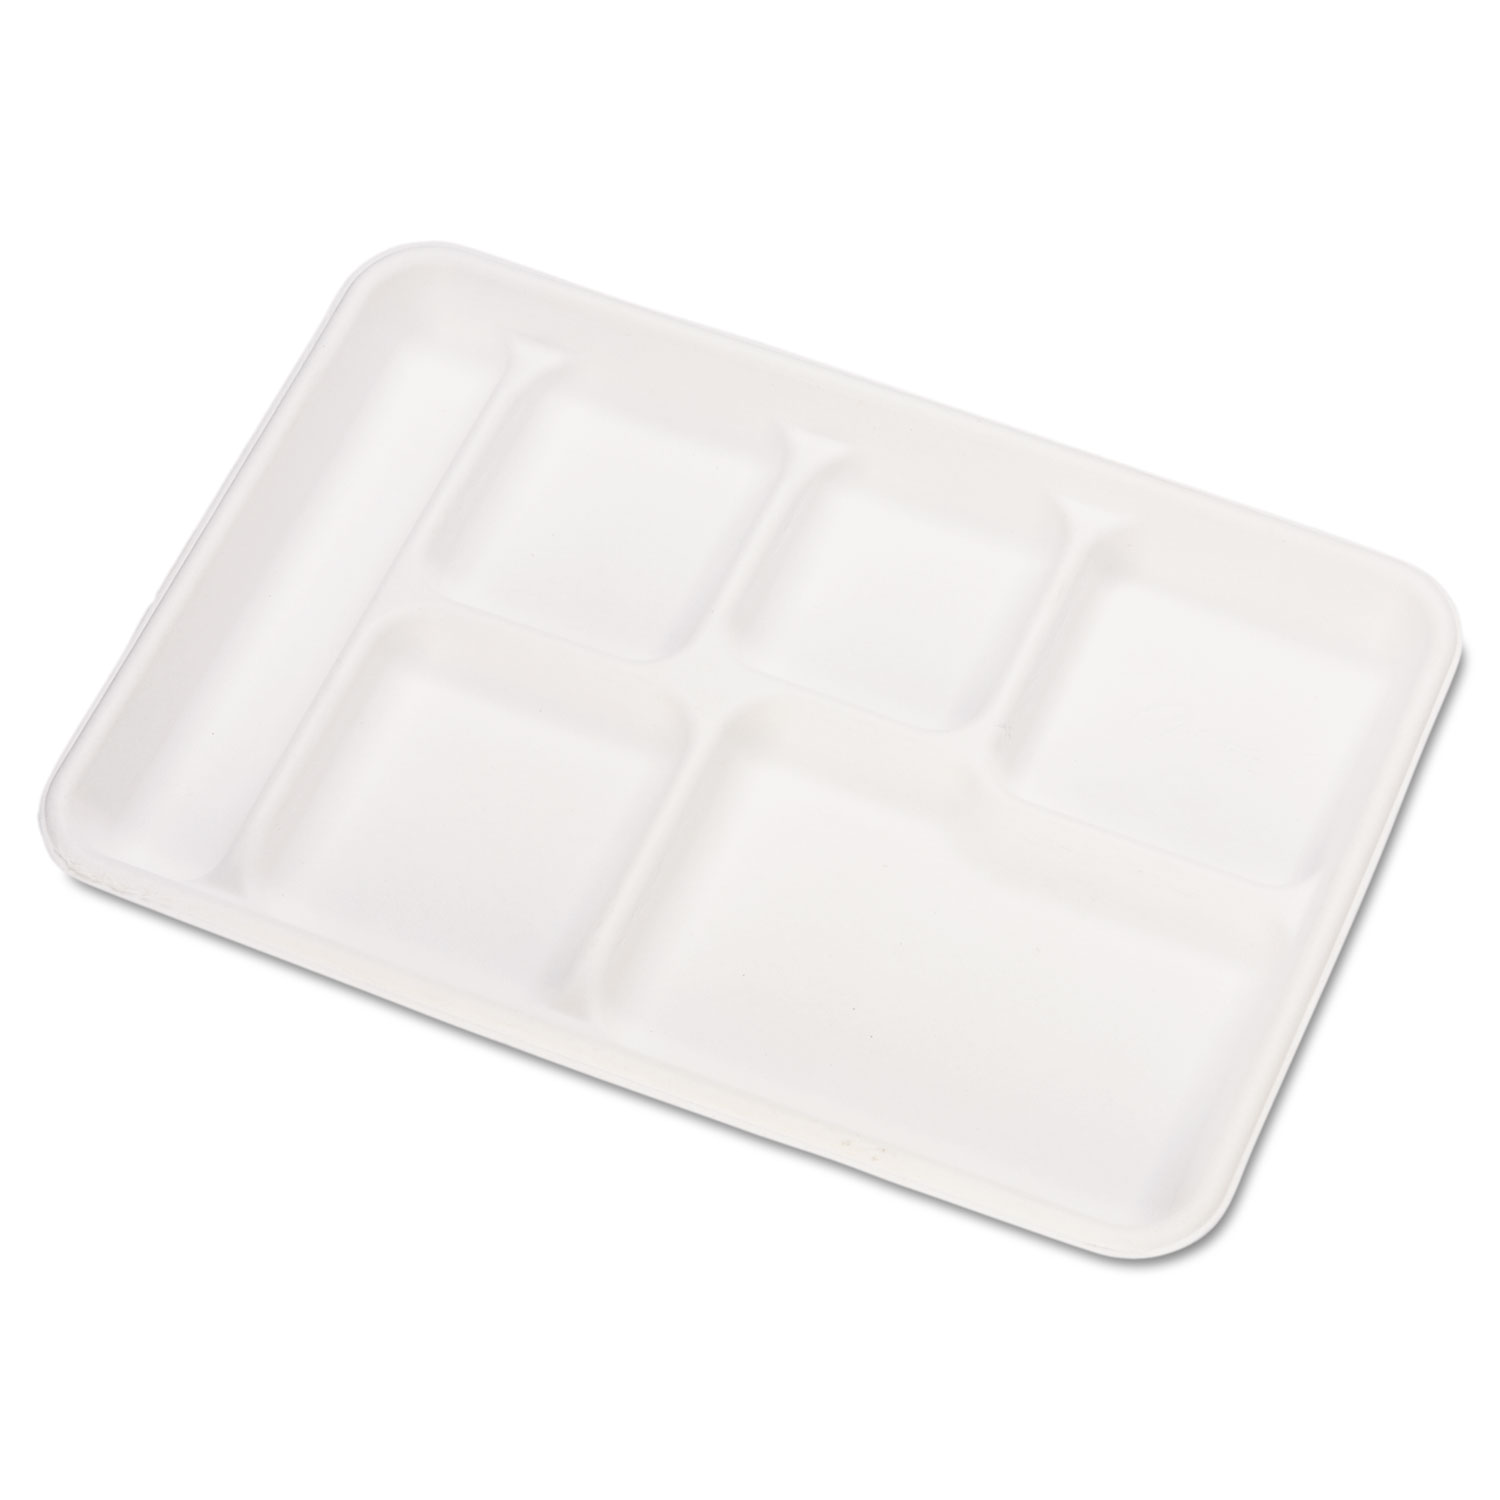  Chinet 22021 Heavy-Weight Molded Fiber Cafeteria Trays, 6-Comp, 8 1/2 x 12 1/2, 500/Carton (HUH22021CT) 